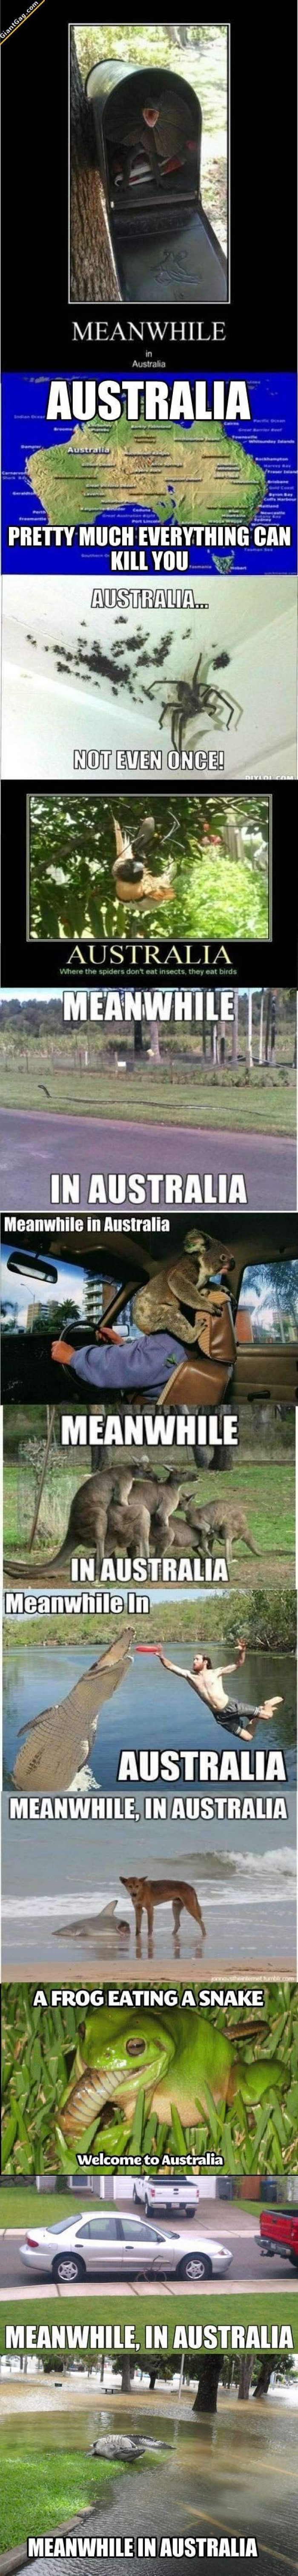 Meanwhile In Australia 